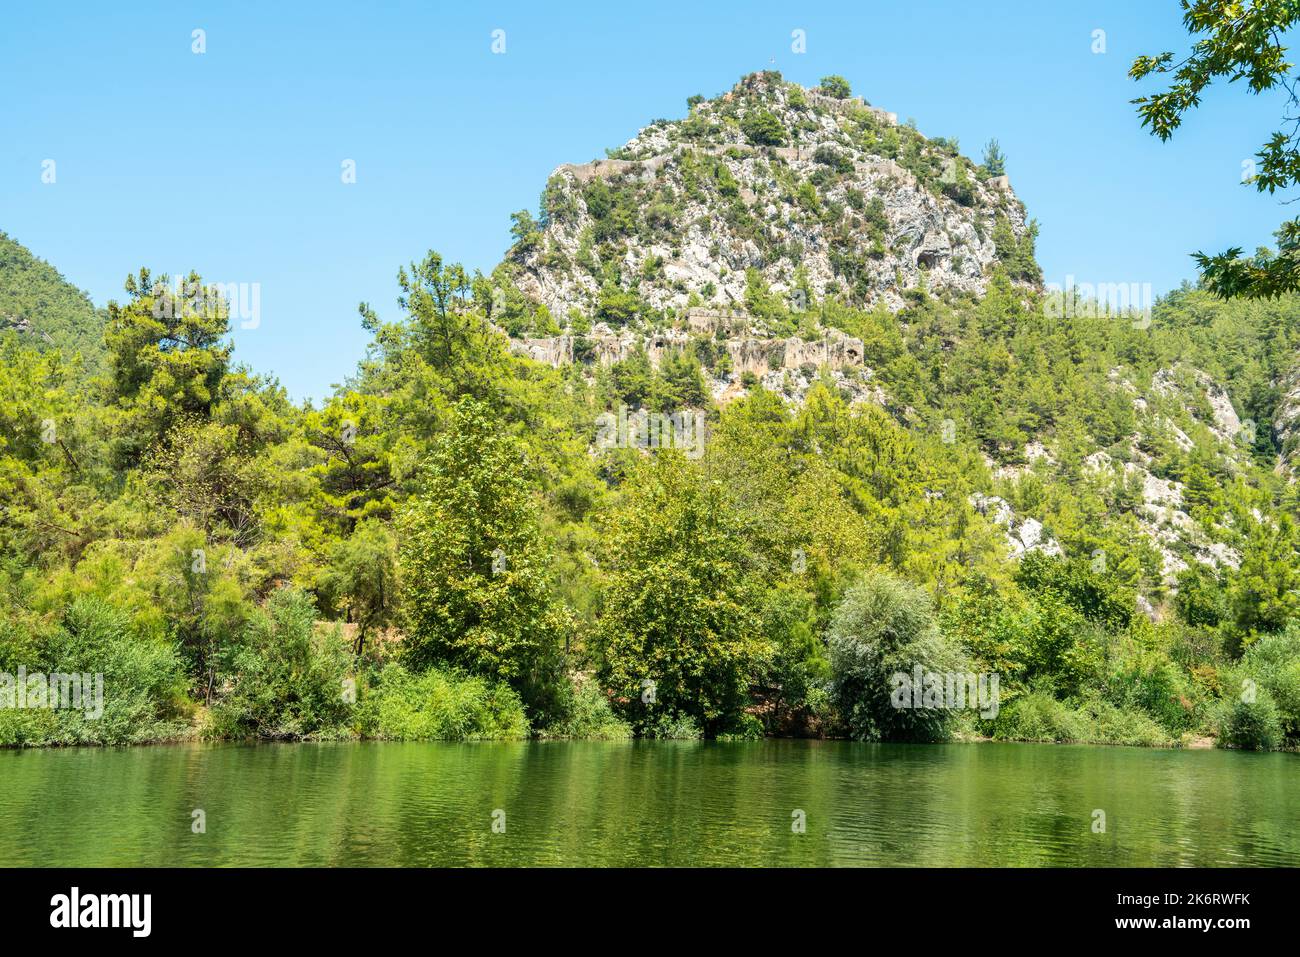 Alara River and a massive rocky hill with the ruins of Alara Castle in Alanya, Turkey. The castle dates from the 13th century. Stock Photo